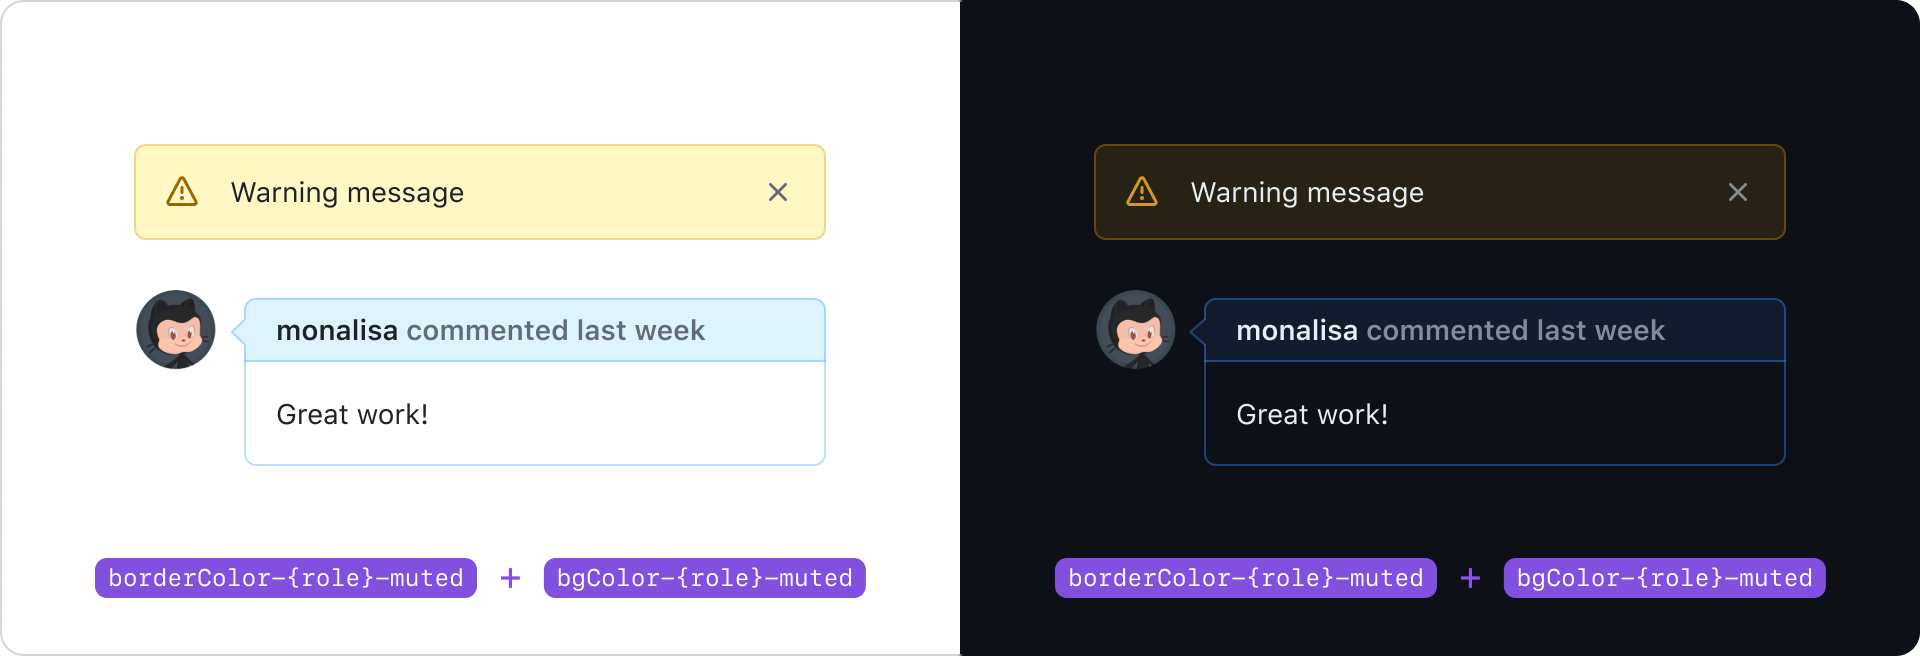 GitHub interface elements showing a warning message and a user comment in both light and dark modes. The warning message has a yellow background with a caution icon and is dismissible with a close button. The user comment by 'monalisa' features a speech bubble with a light blue background in light mode and a dark blue background in dark mode, both with muted borders.